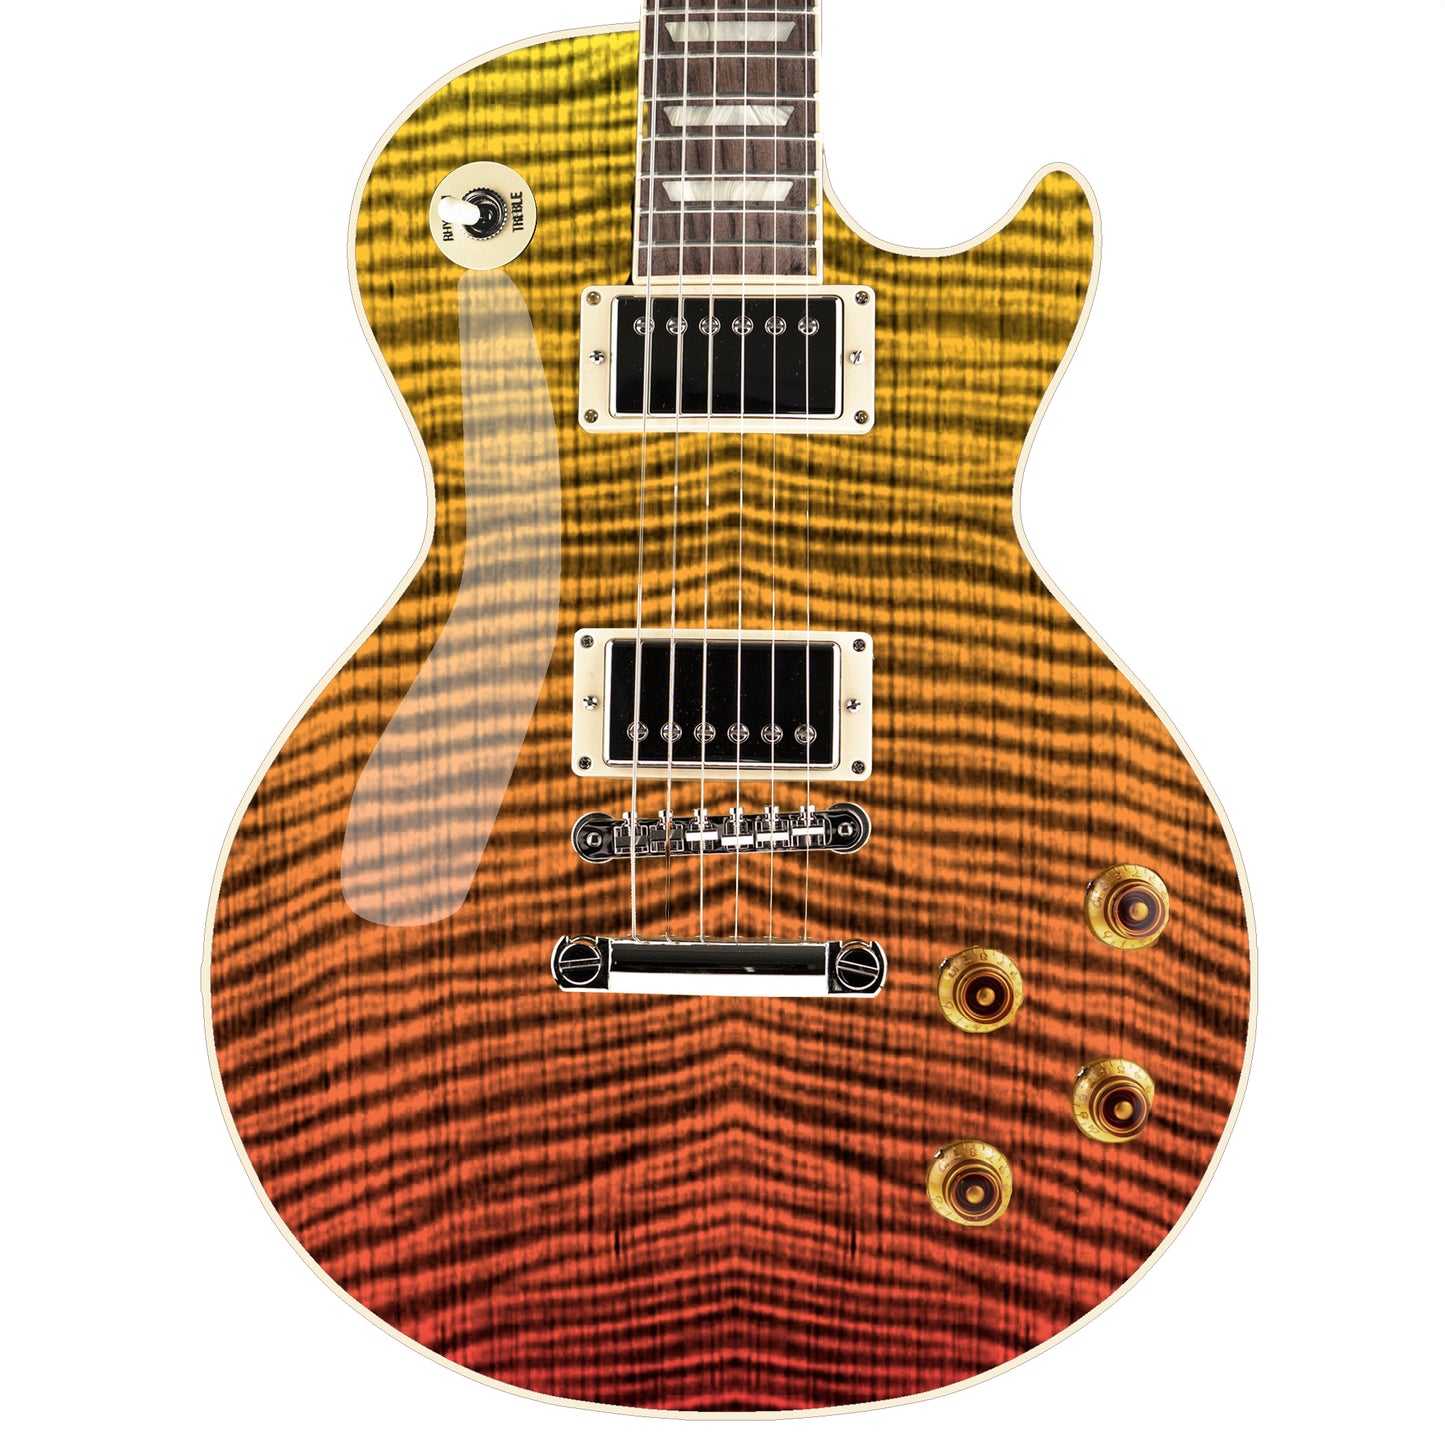 Guitar Skin Wrap Laminated Vinyl Decal Sticker The Tiger Fade Flamed Maple GS59